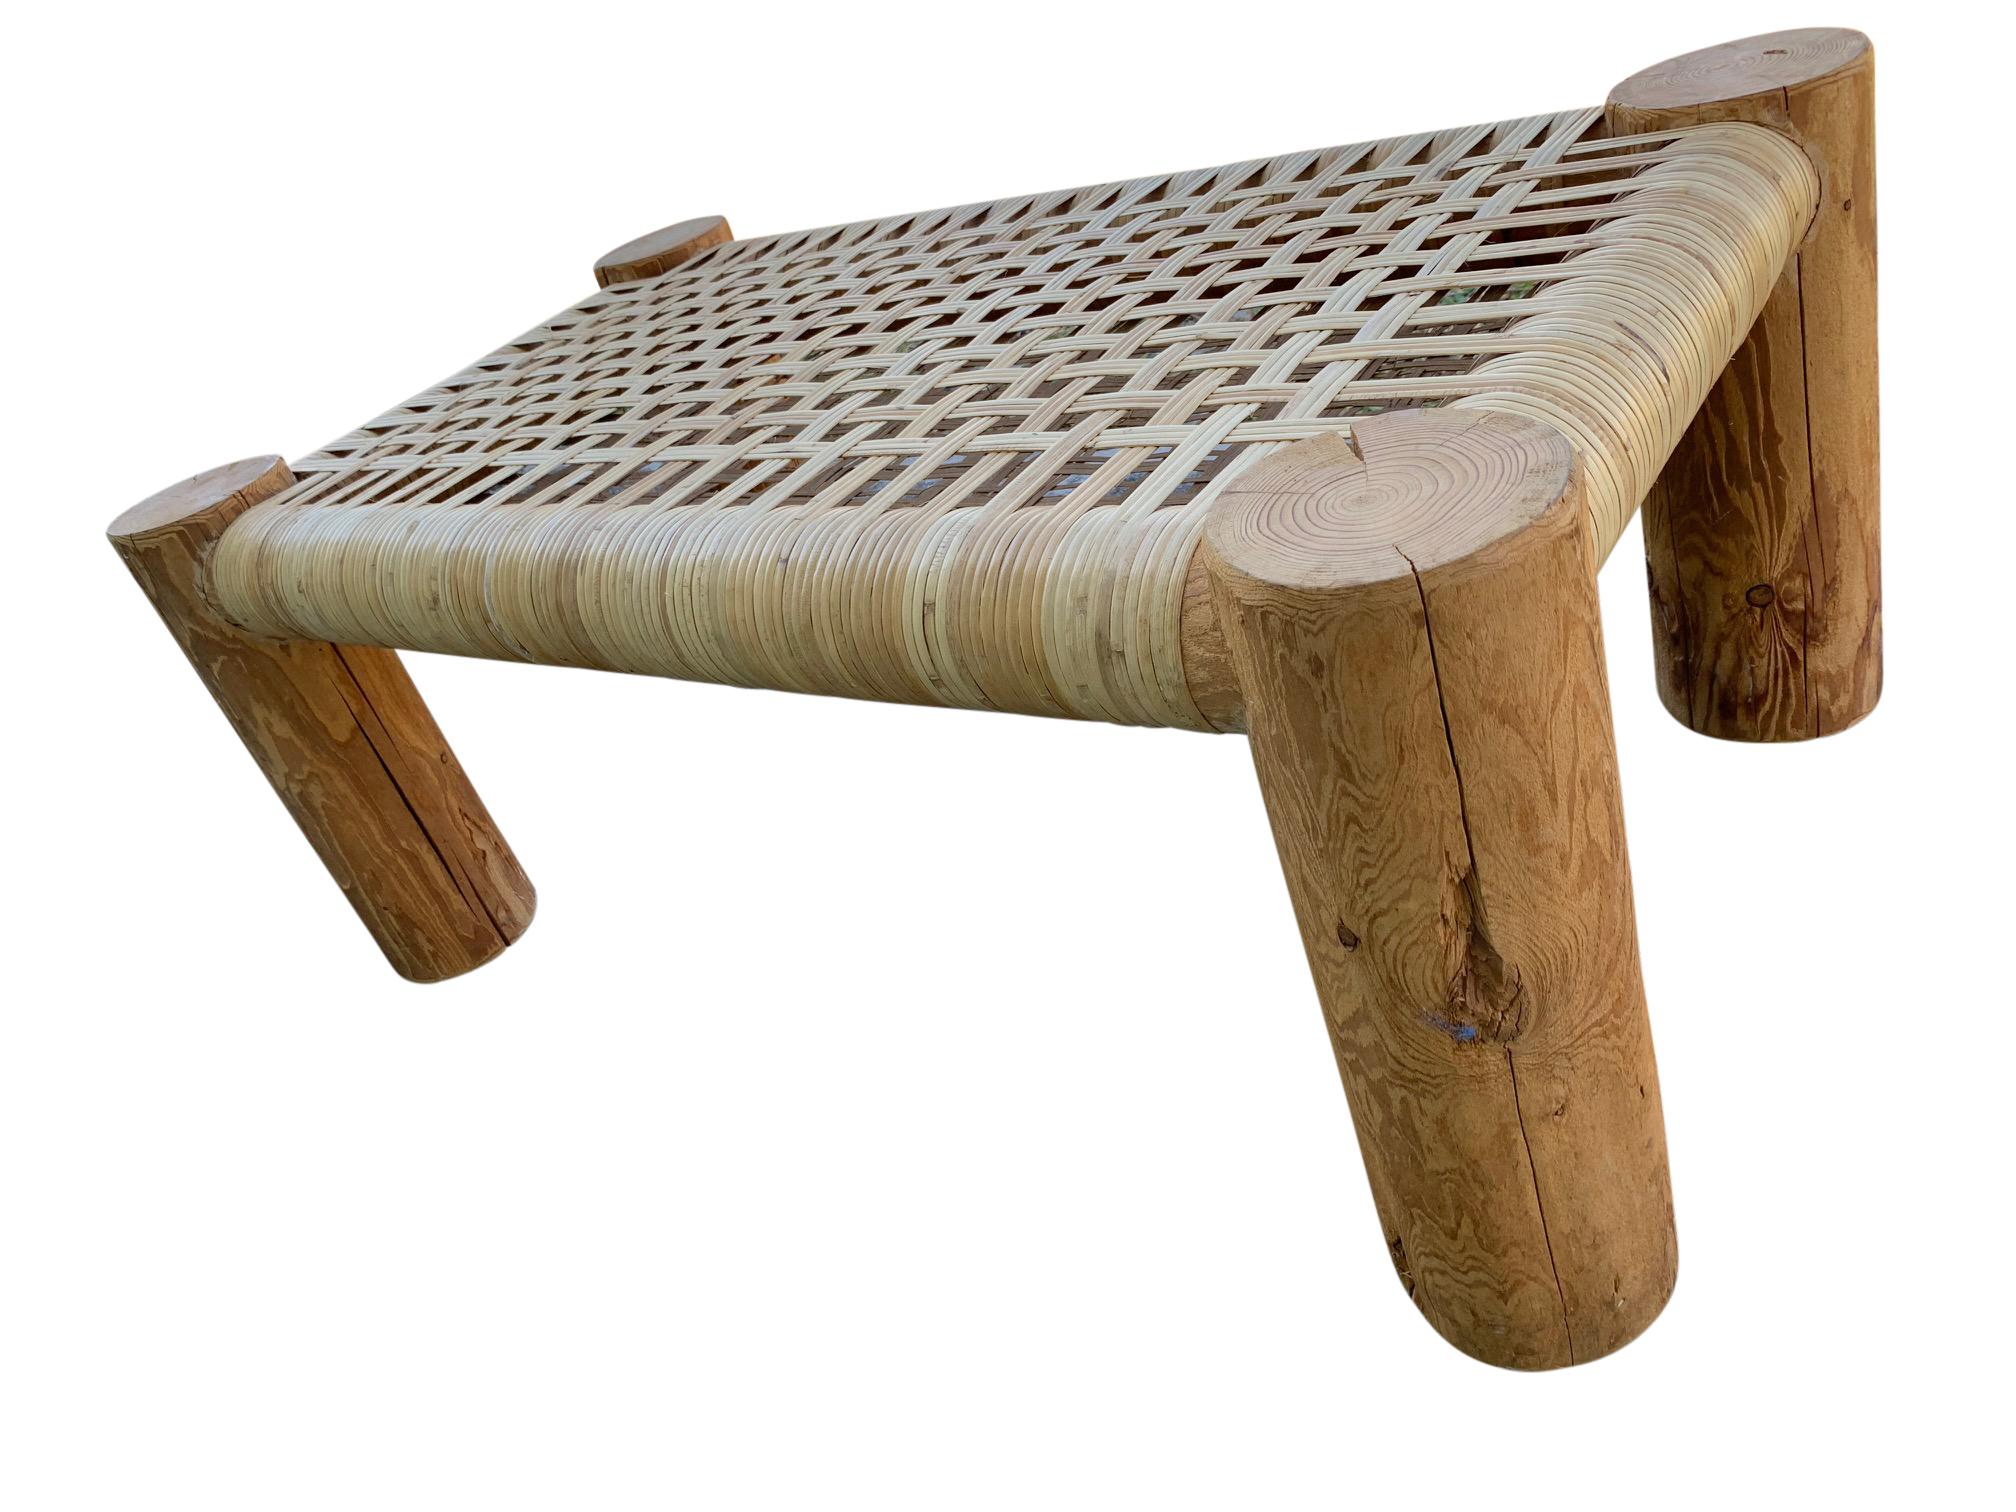 Cane Wicker Wrapped Modern Rustic Wood Bench Table For Sale 2